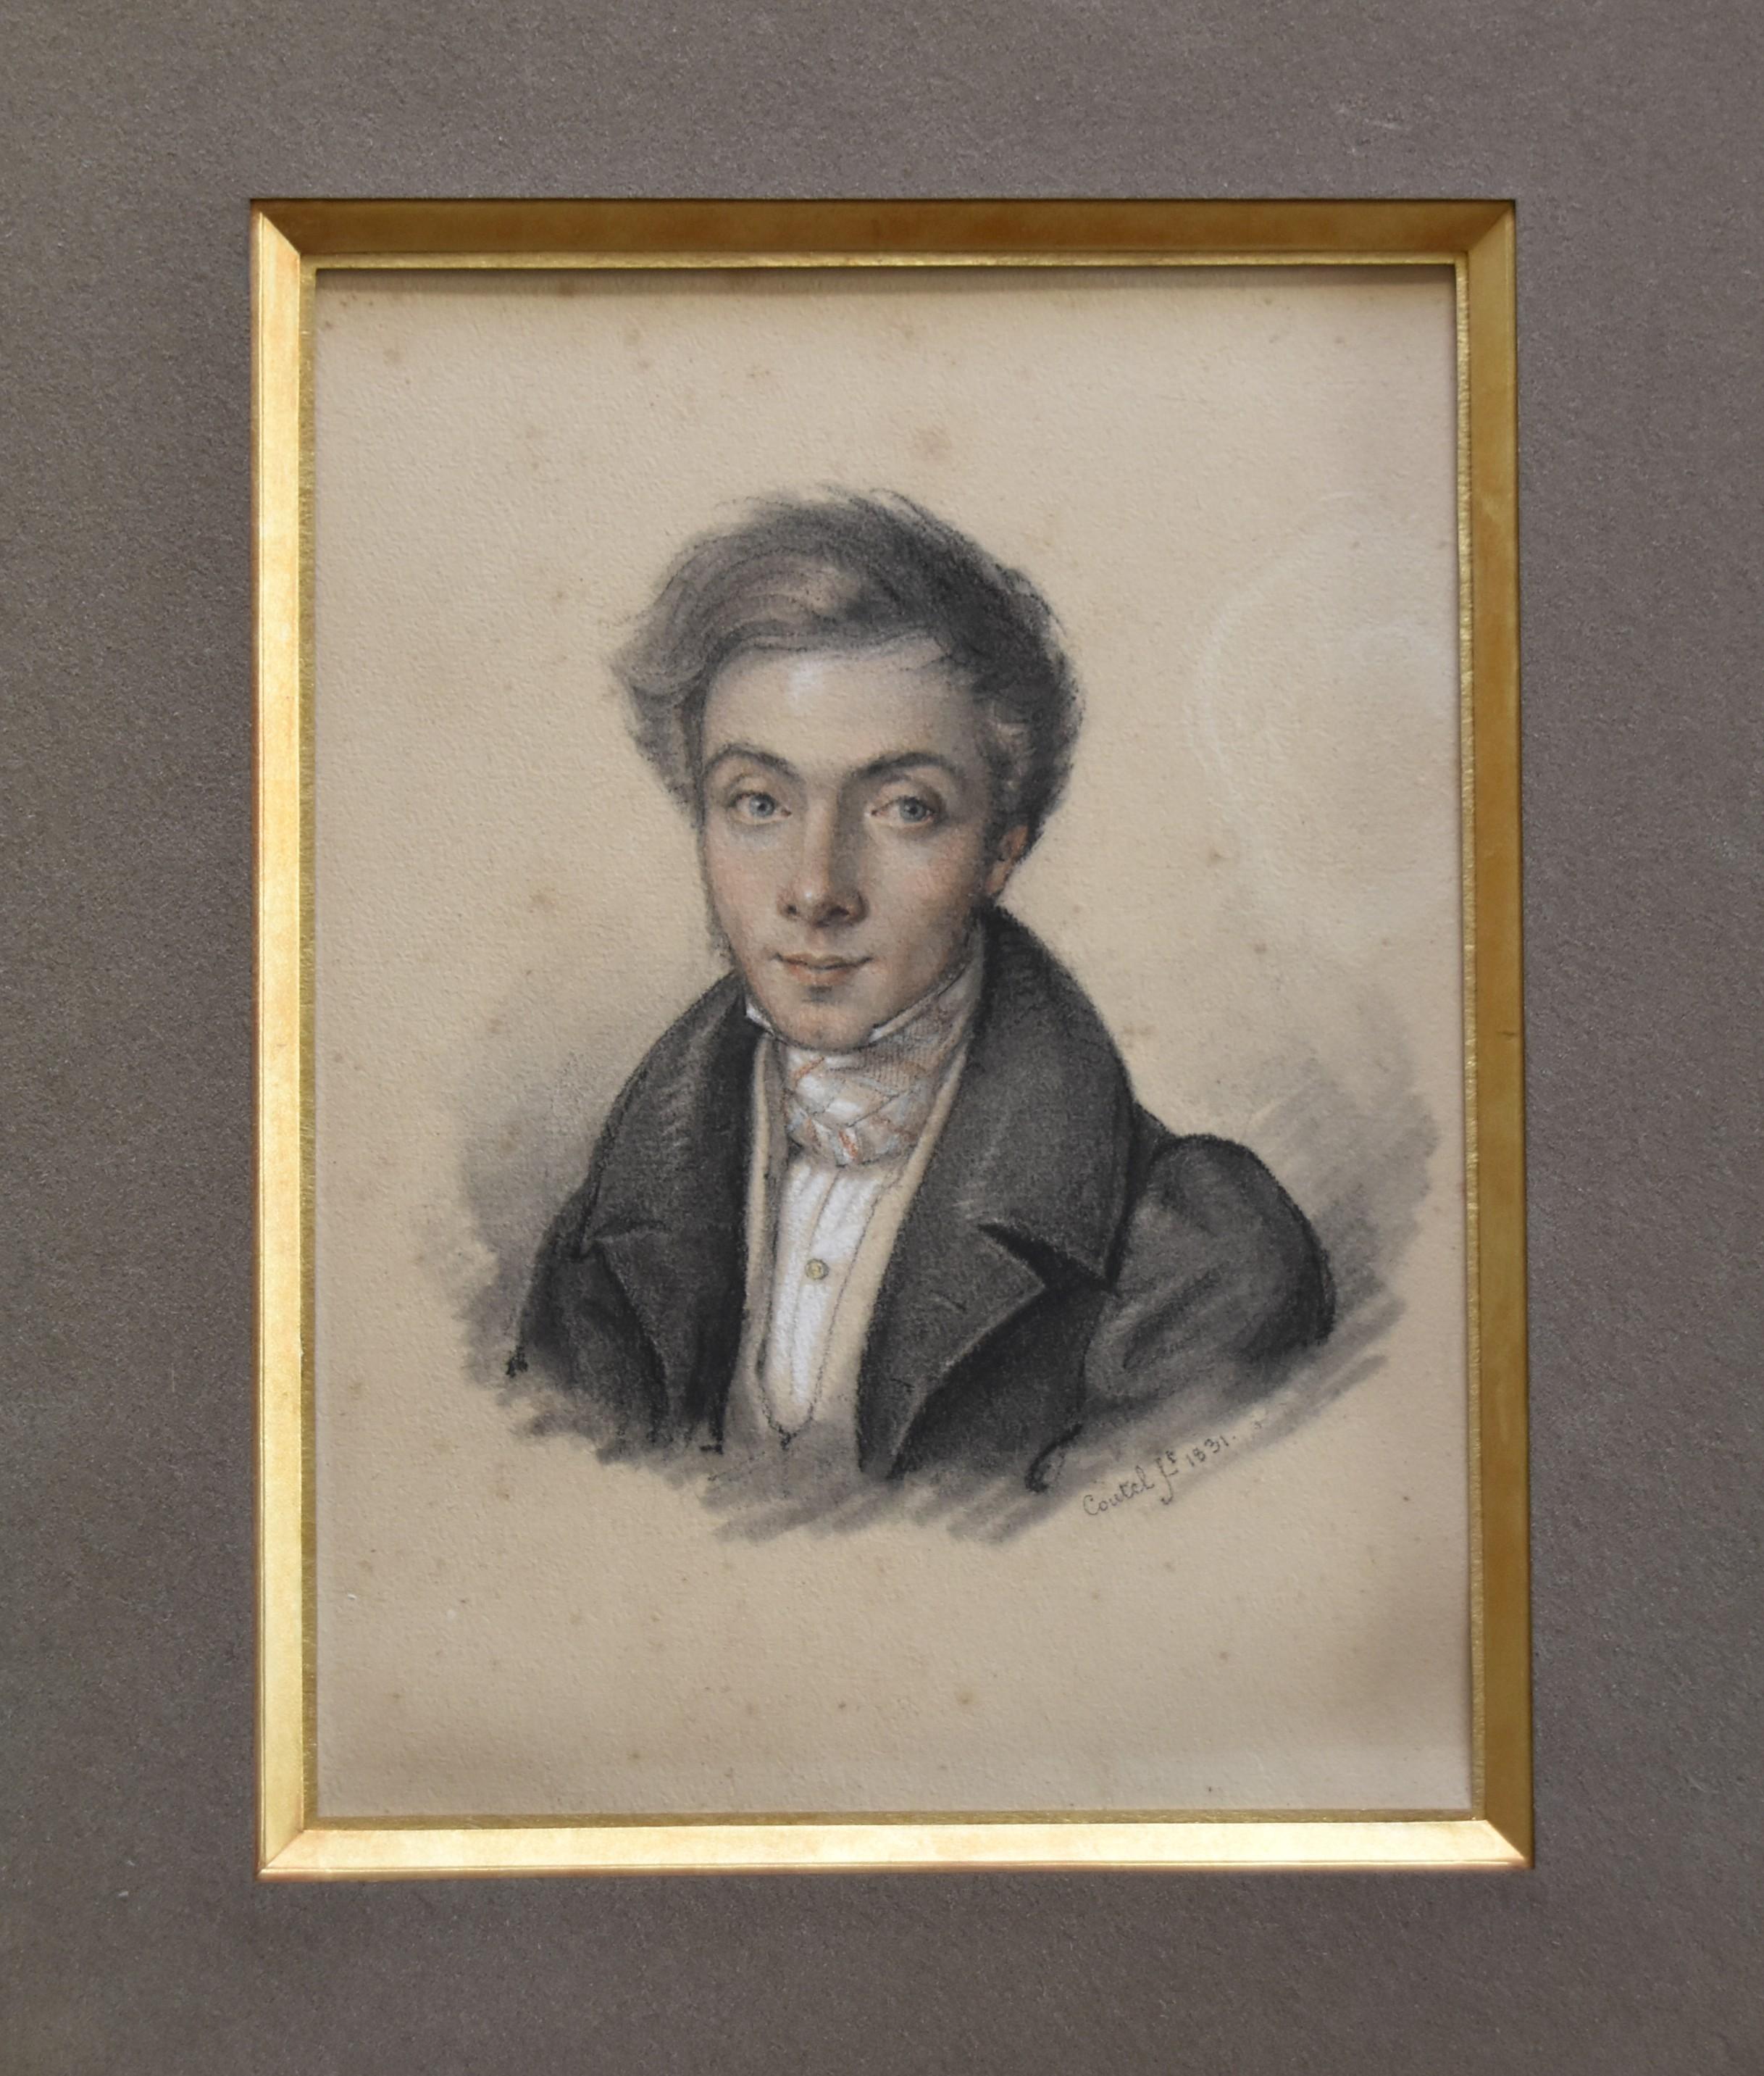 French Romantic School
Portrait of a young man, 1831
signed and dated 